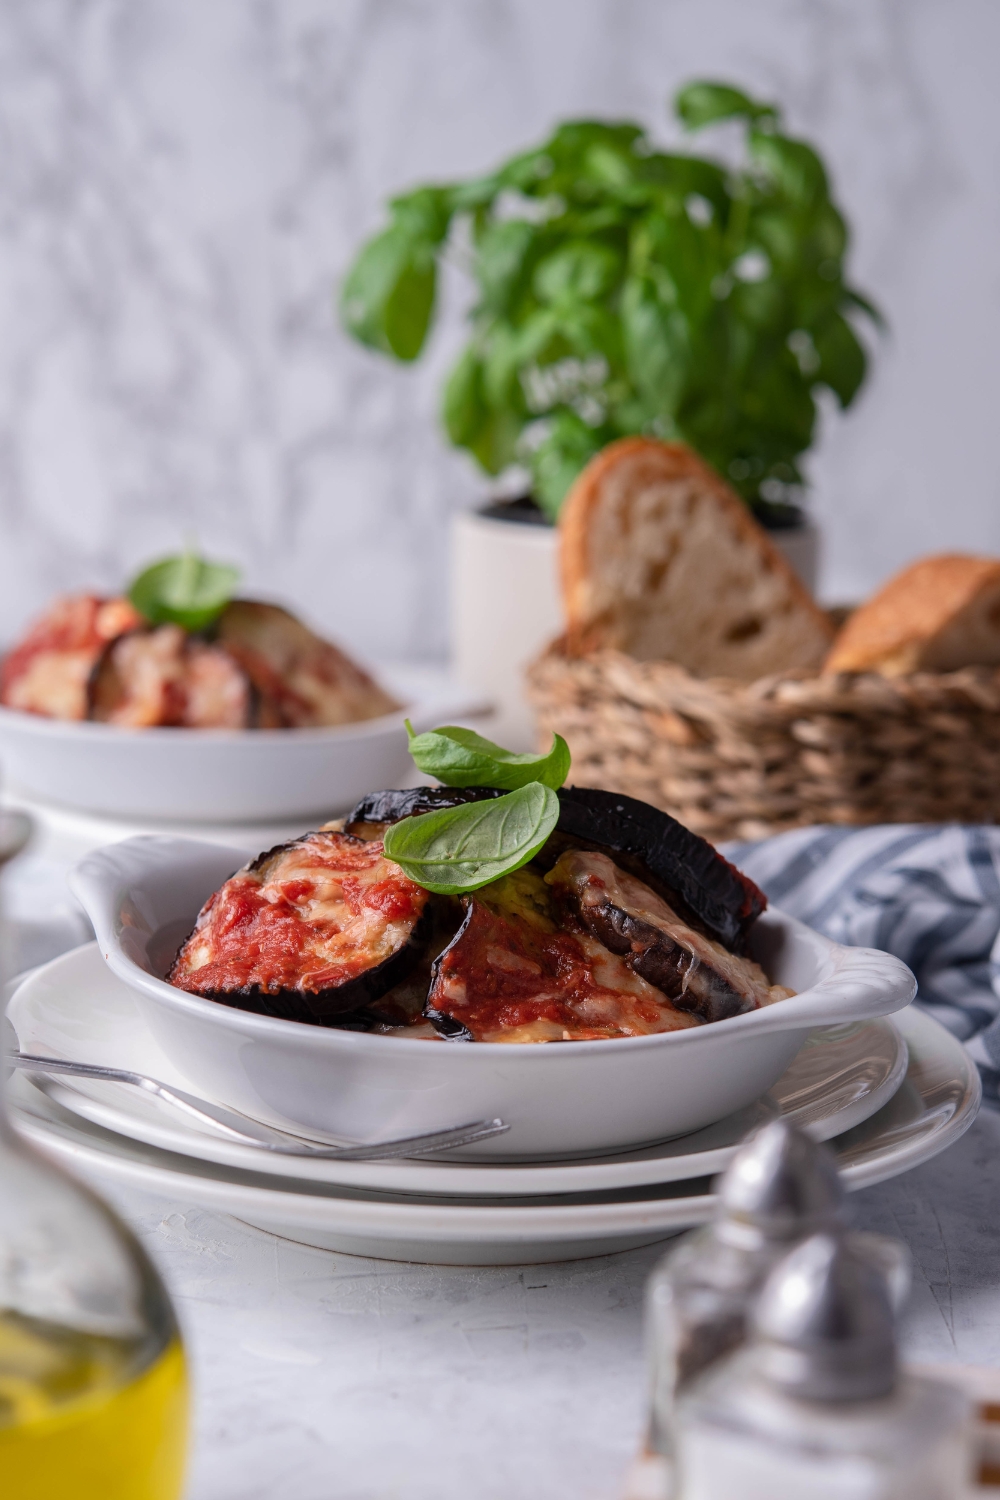 Eggplant parmesan slices in a white bowl on top of a plate.